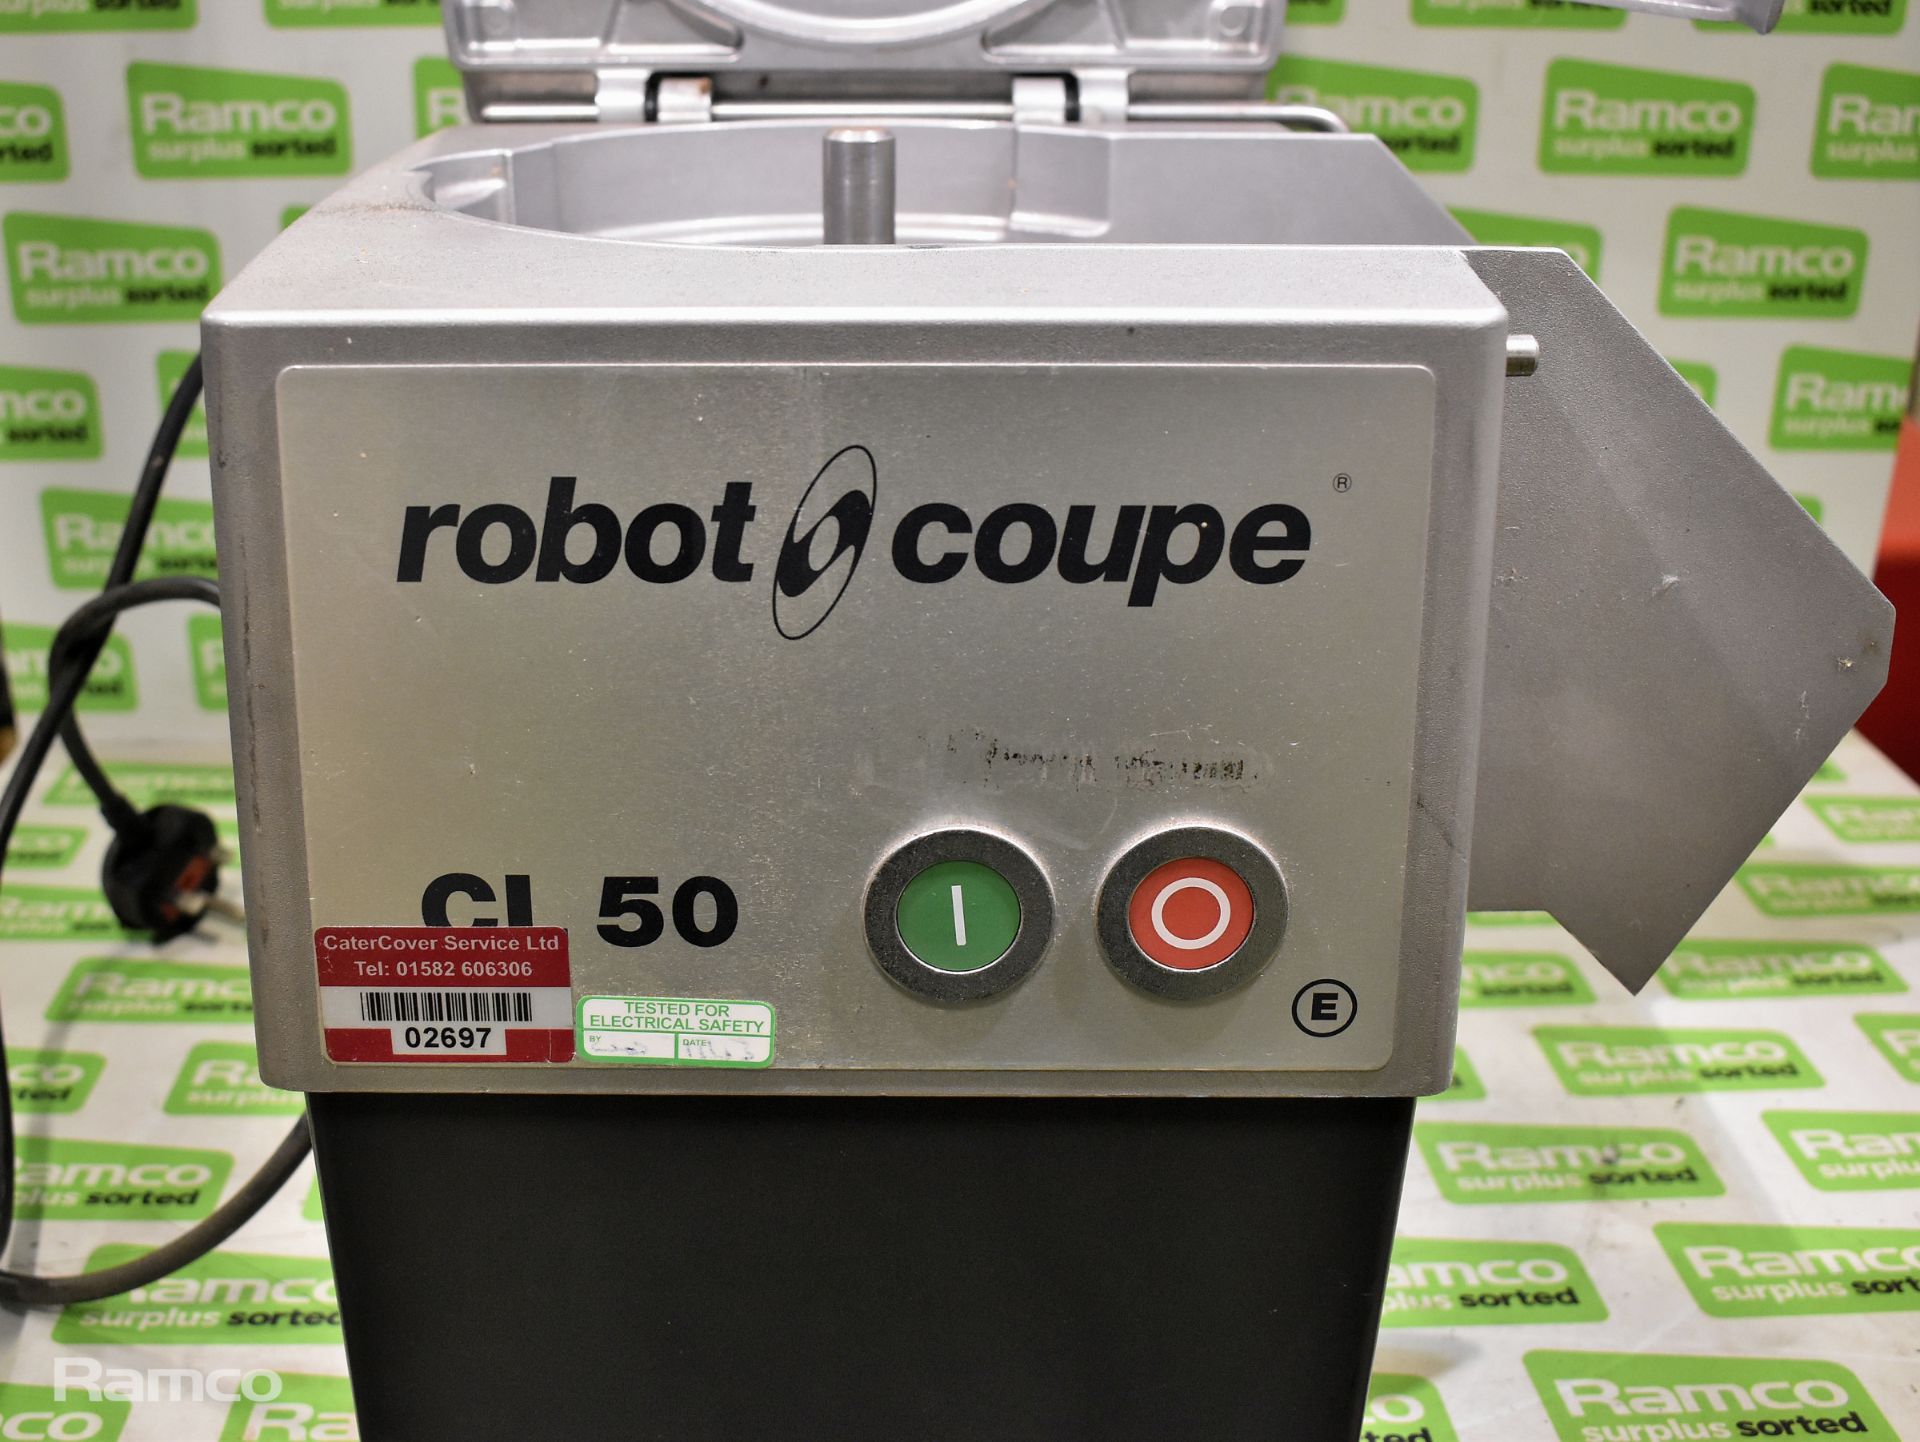 Robot Coupe CL50 vegetable preparation machine - Image 5 of 7